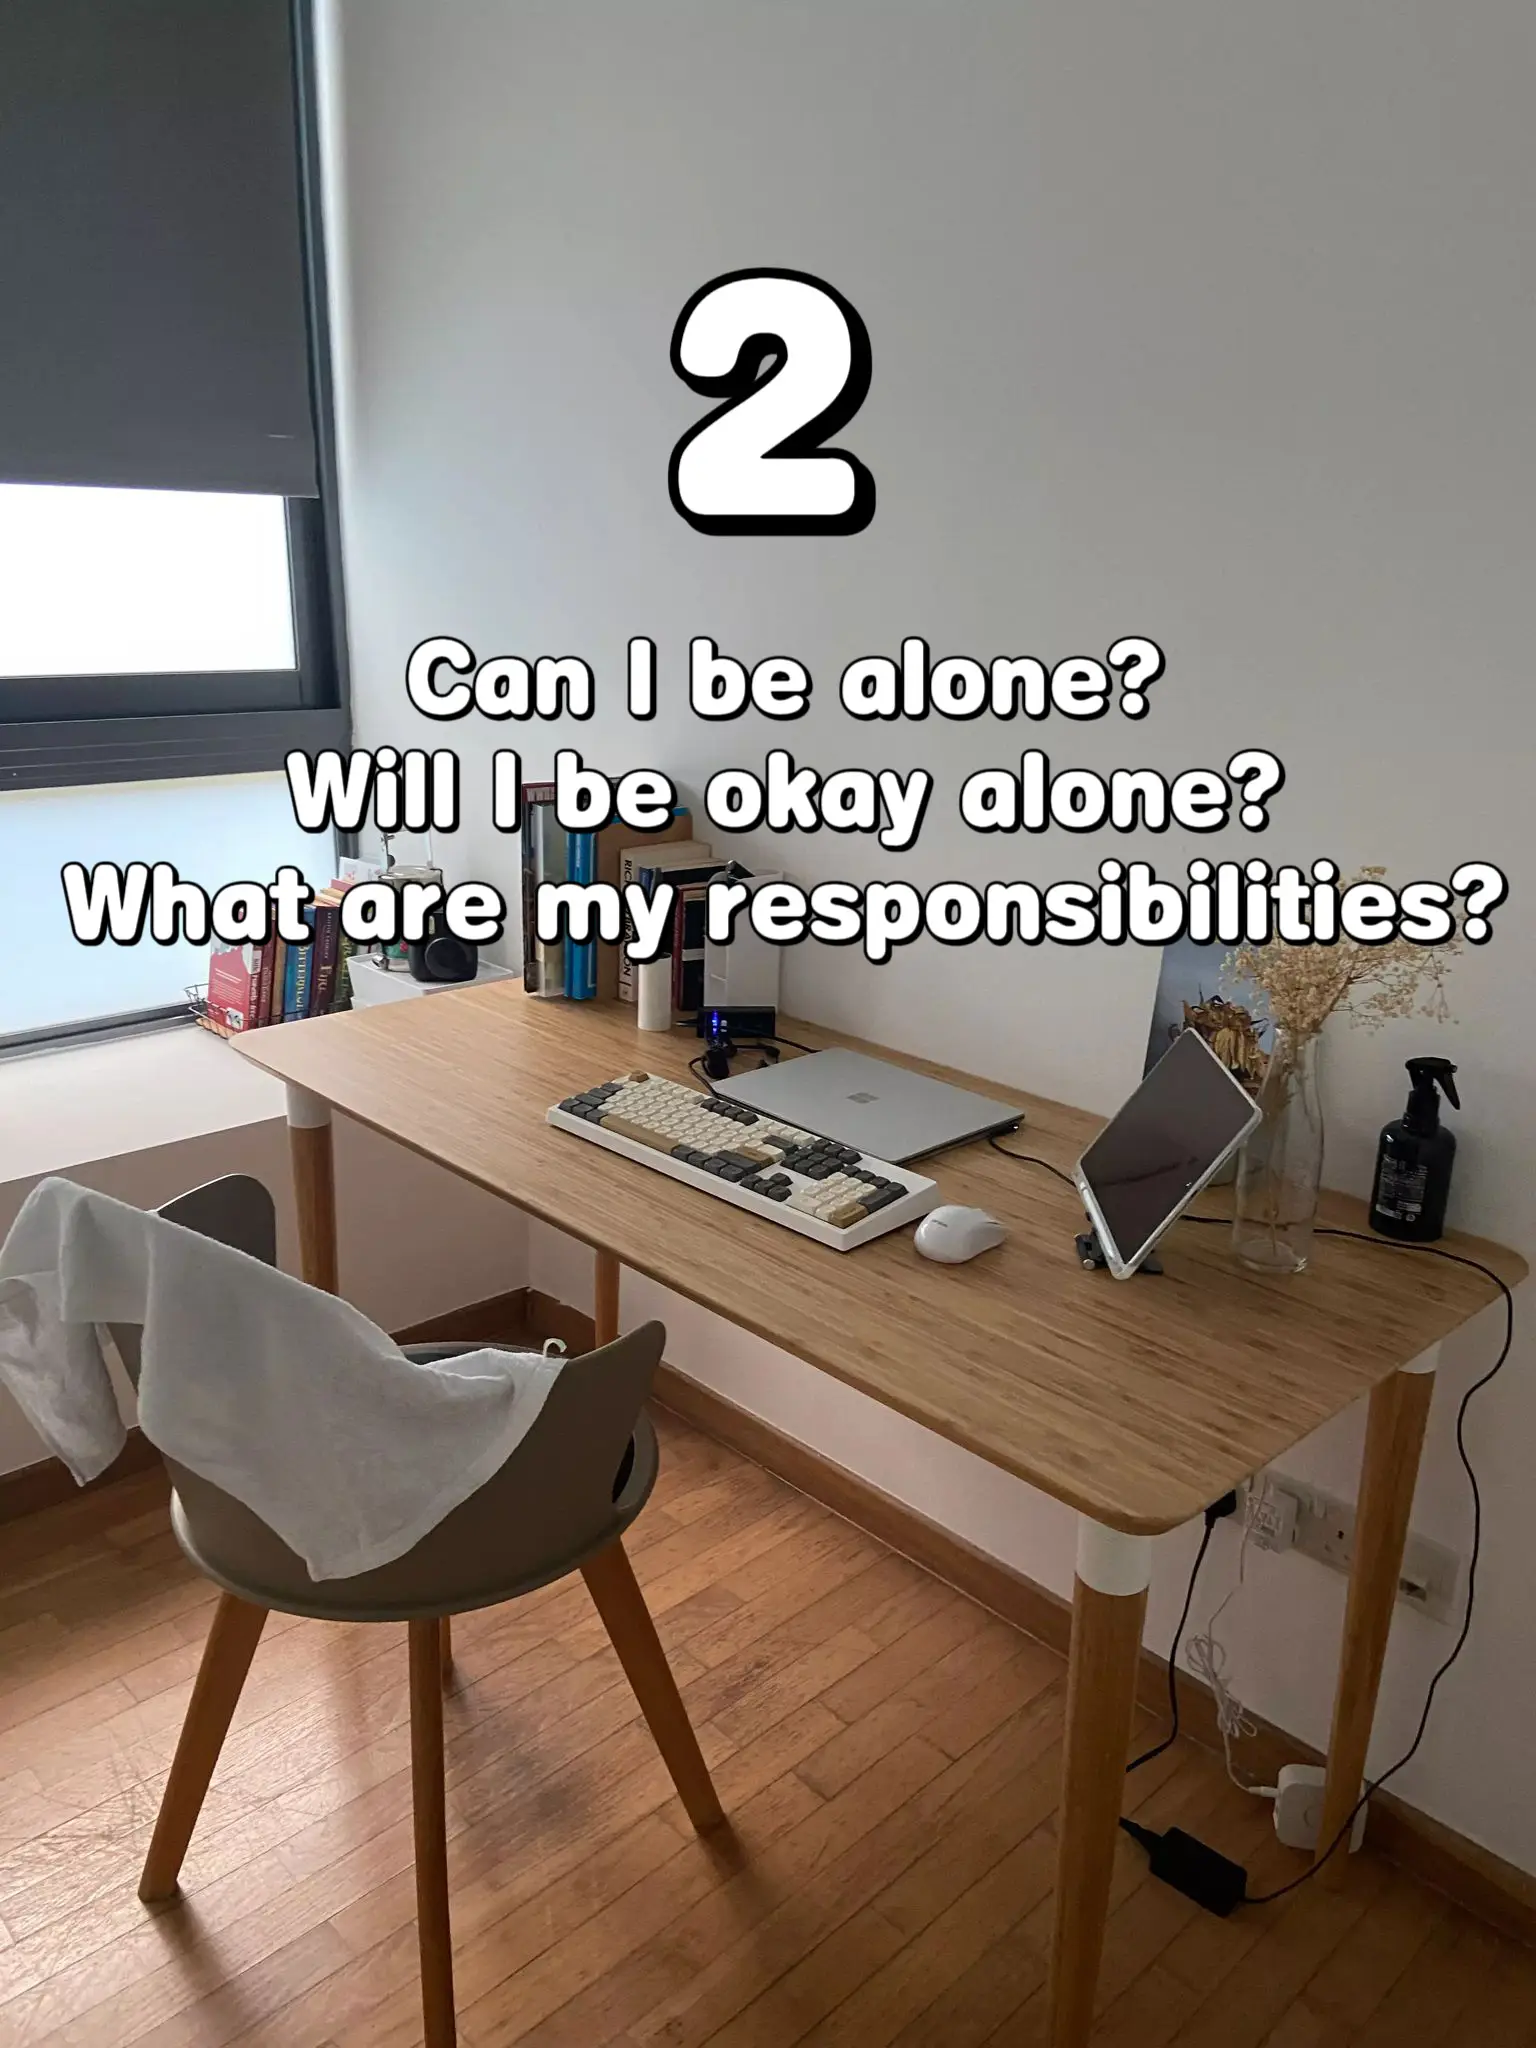 Want to live alone? Consider 3 things first 's images(2)